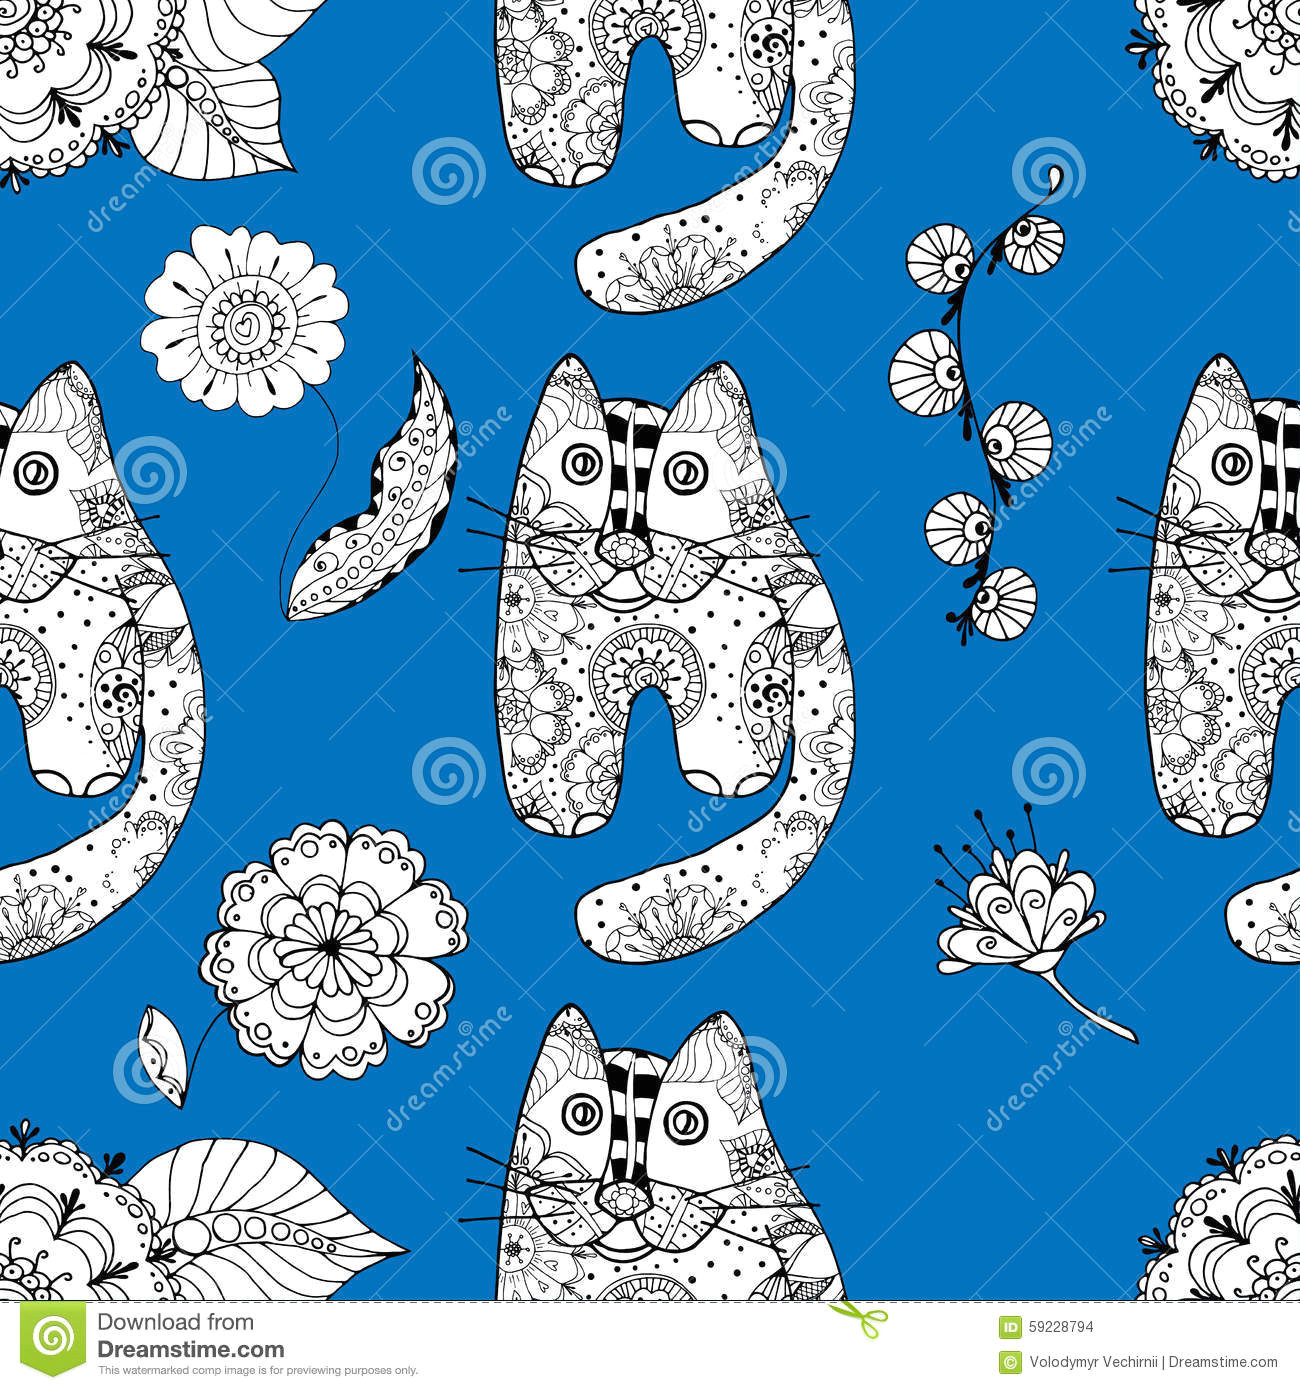 seamless pattern with cute cats vector illustration